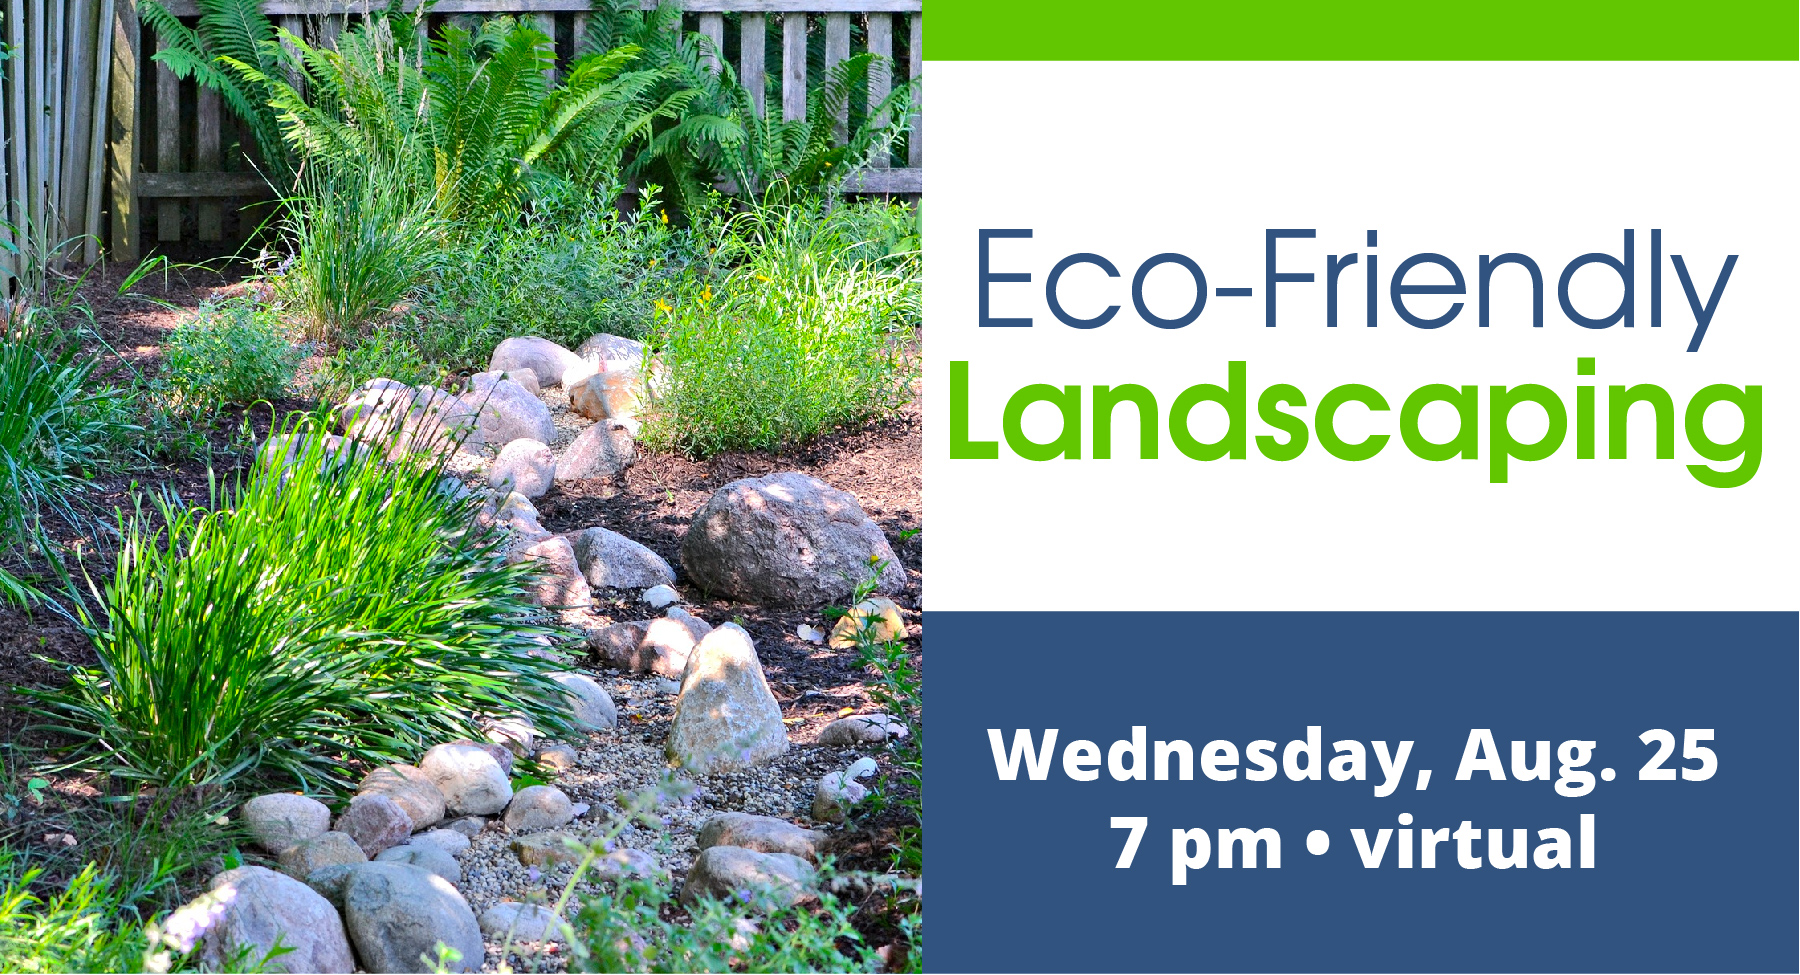 Eco-Friendly Landscaping, Wednesday, August 25 at 7 pm